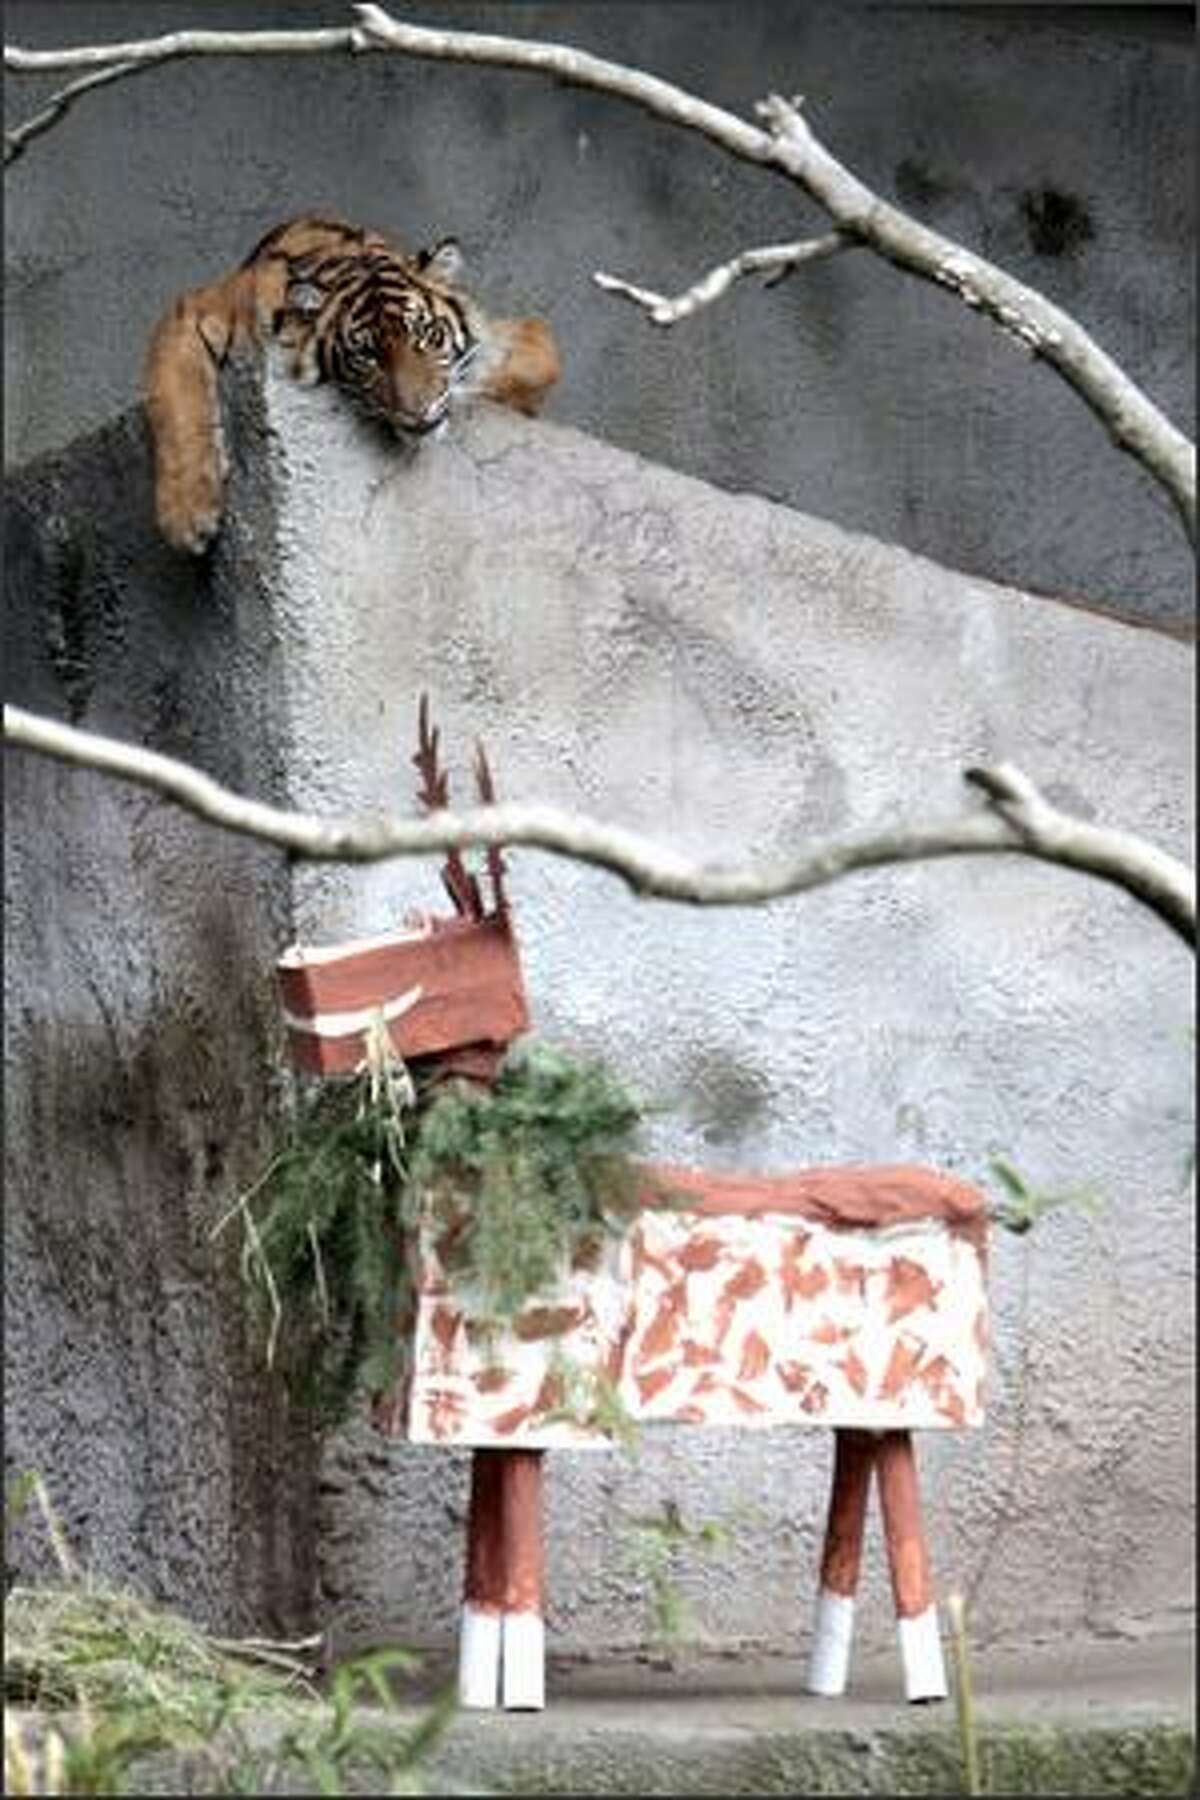 Hadiah, a Sumatran tiger, attacks a papier mache reindeer given for her first birthday at the Woodland Park Zoo.